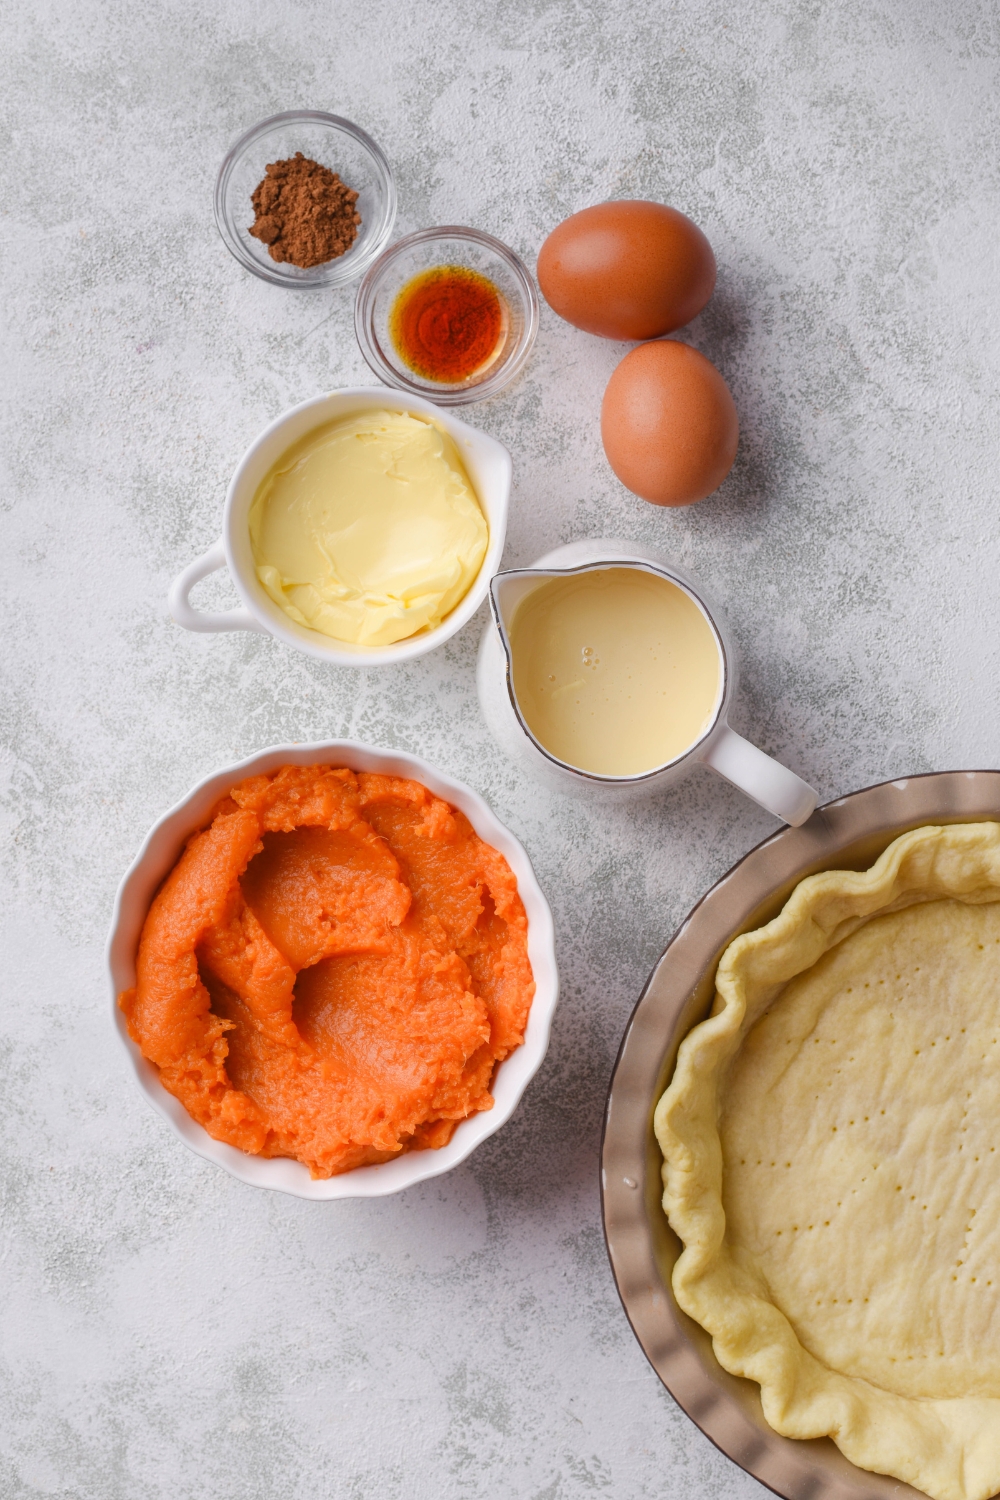 An assortment of ingredients including a pie pan with a pie crust in it and bowls of sweet potato puree, butter, vanilla extract, spices, condensed milk, and two eggs, all on a grey counter.